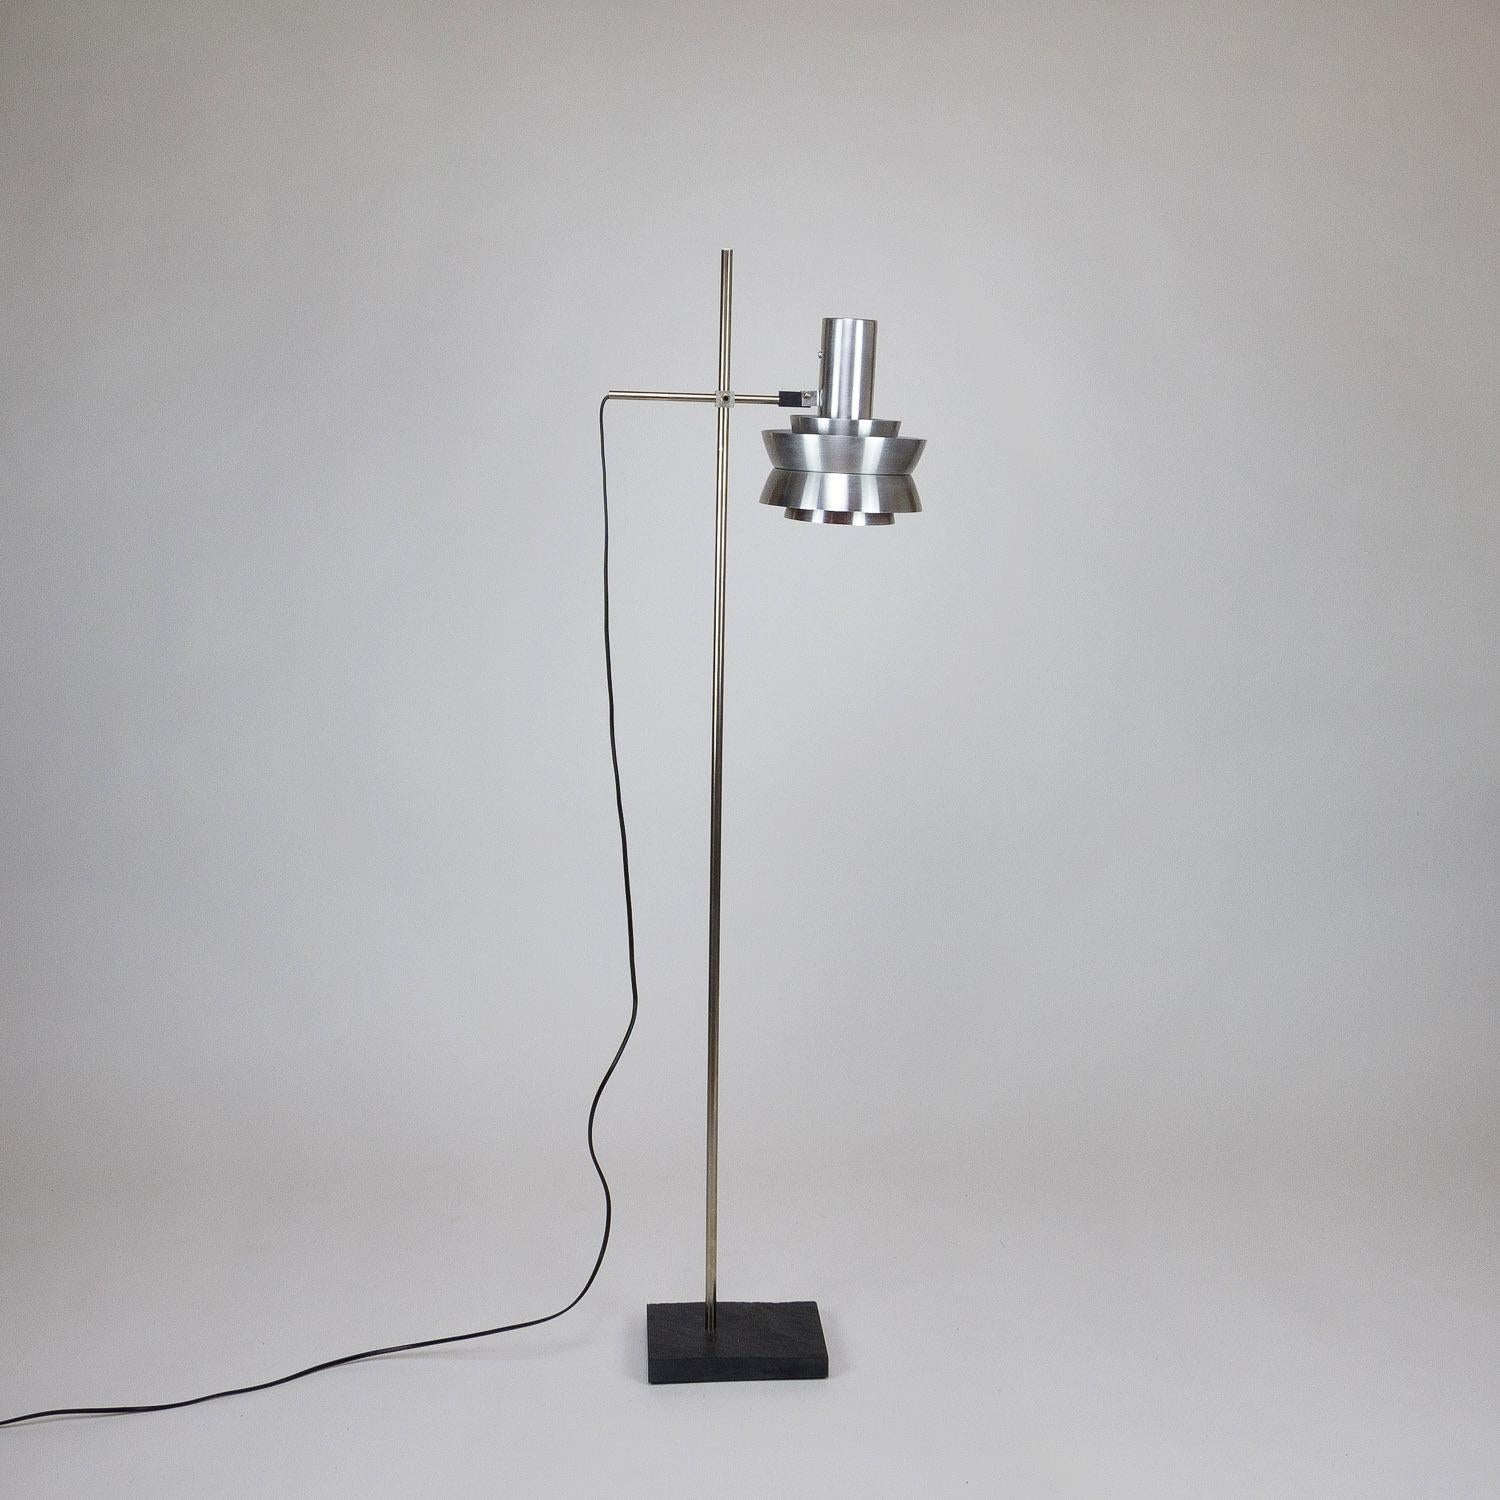 1960s Swedish Trava floor lamp by Sigurd Lindkvist - who also worked under the pseudonym Carl Thore - design director for Granhaga Metallindustri. The Strava range featured a concealed bulb and a decidedly Space Age aesthetic. Aluminium shade with